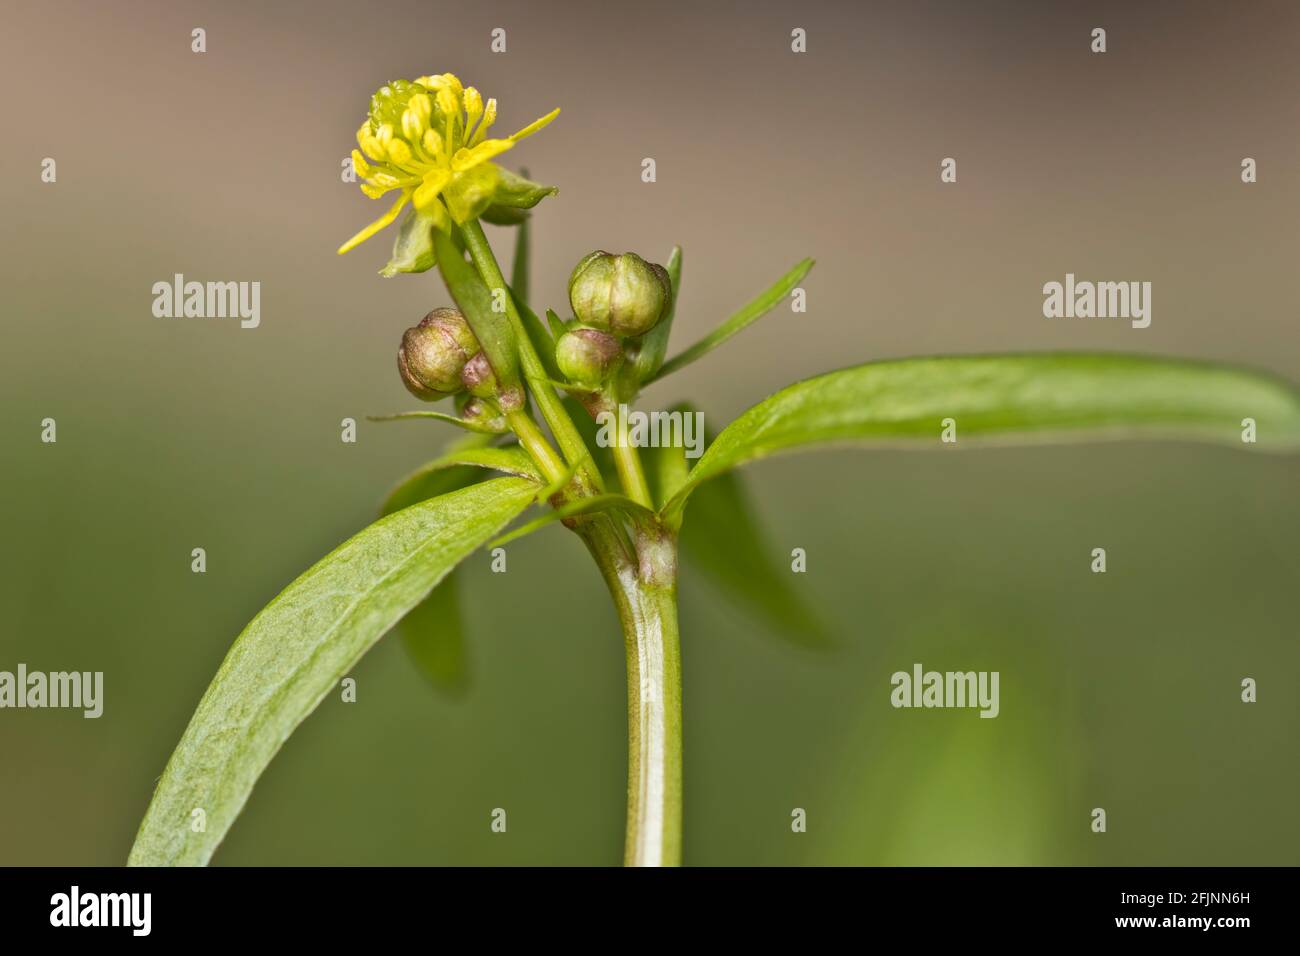 Side view of quick weed flower and flower buds with a blurred background. Stock Photo